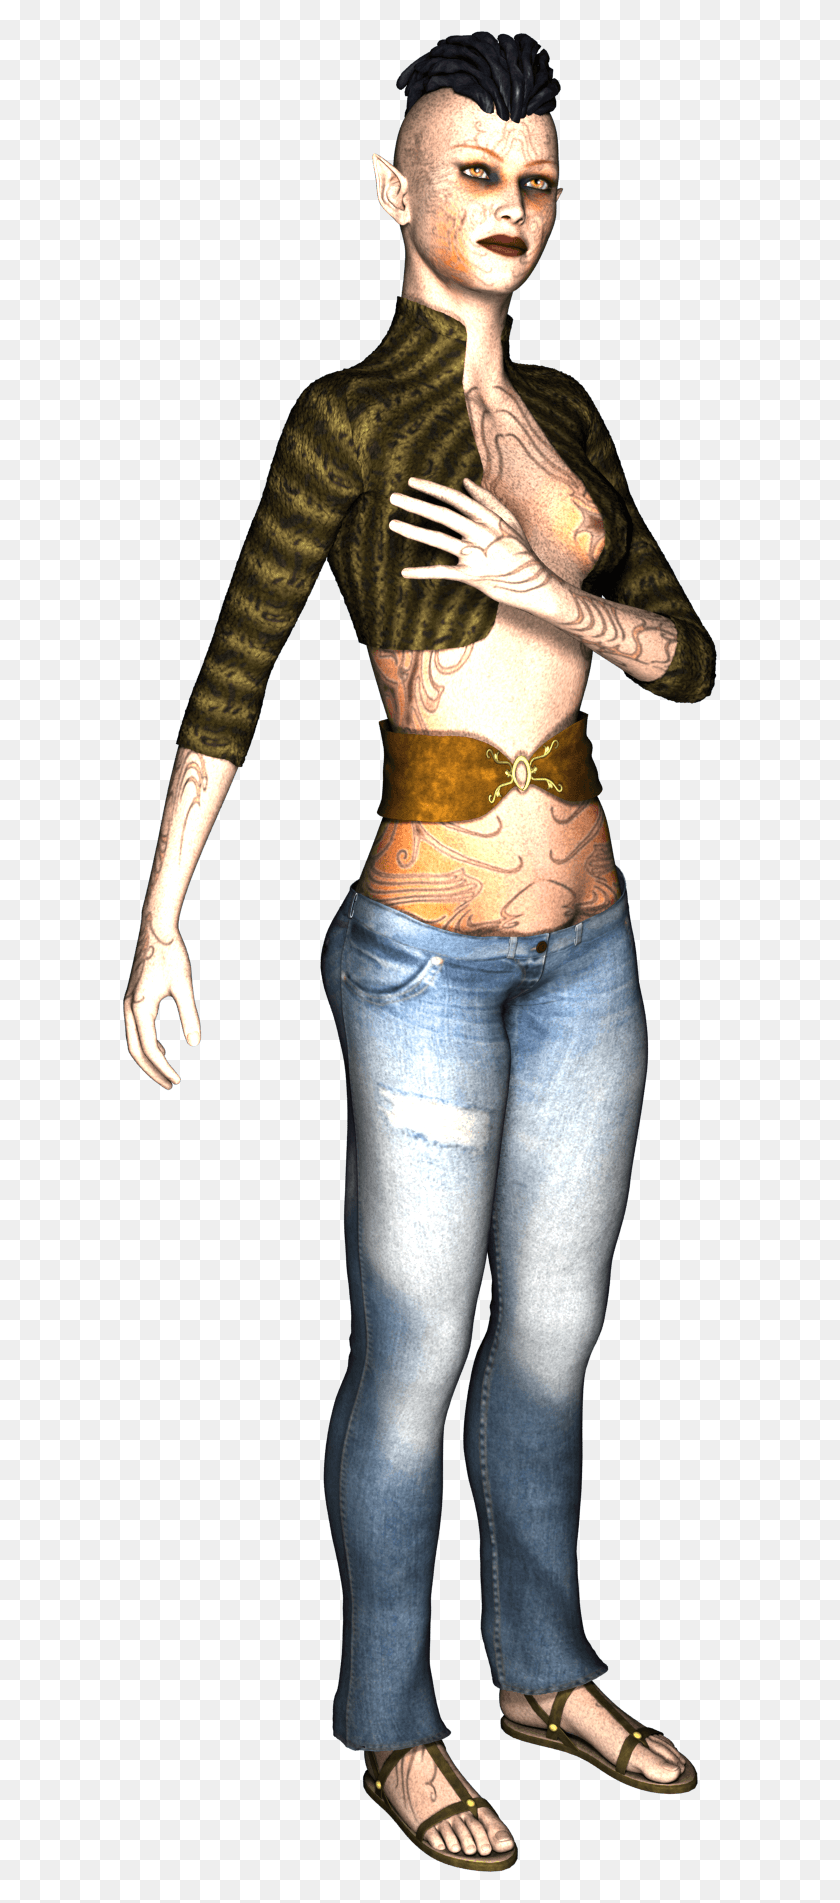 595x1843 Jeans Cabello Modelo 3D Render Mujer, Piel, Persona, Humano Hd Png